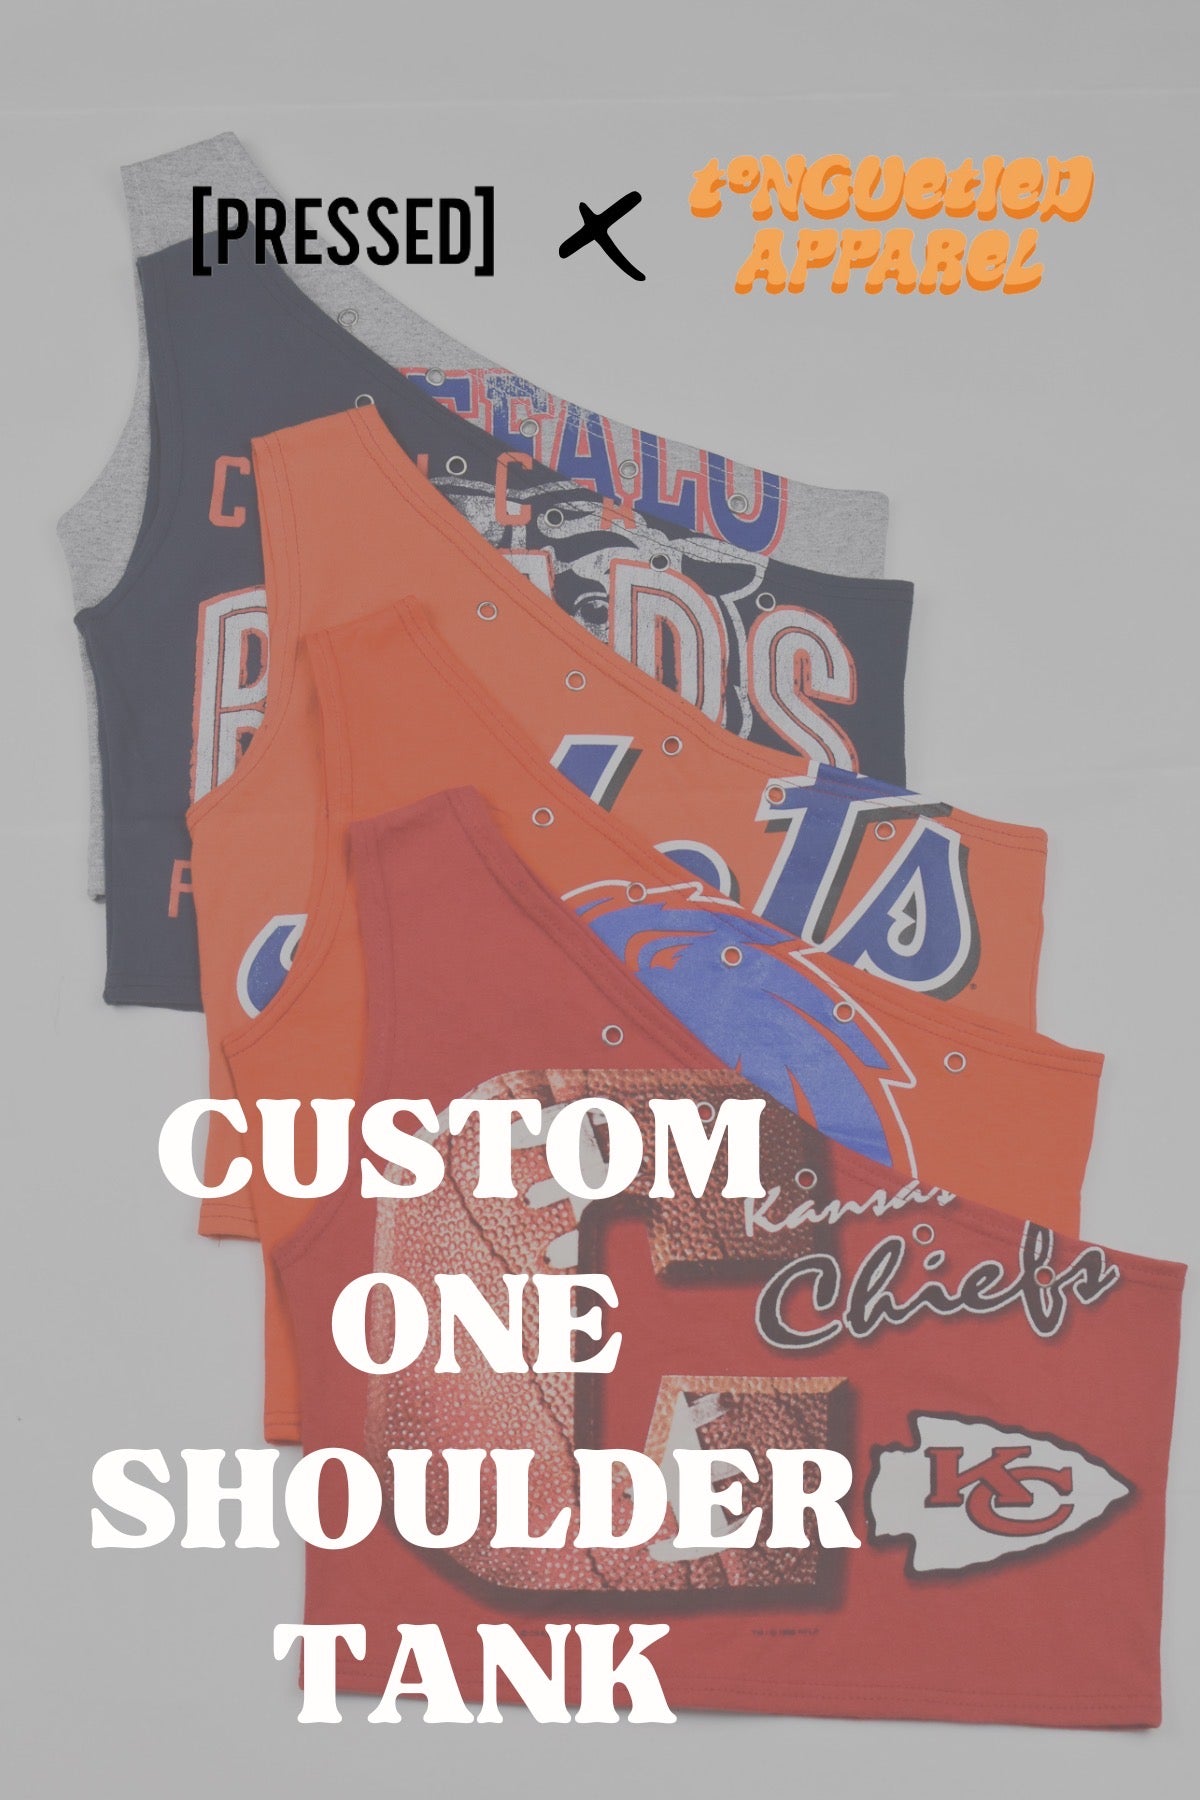 CUSTOM PRESSED X TONGUE TIED ONE SHOULDER TANK